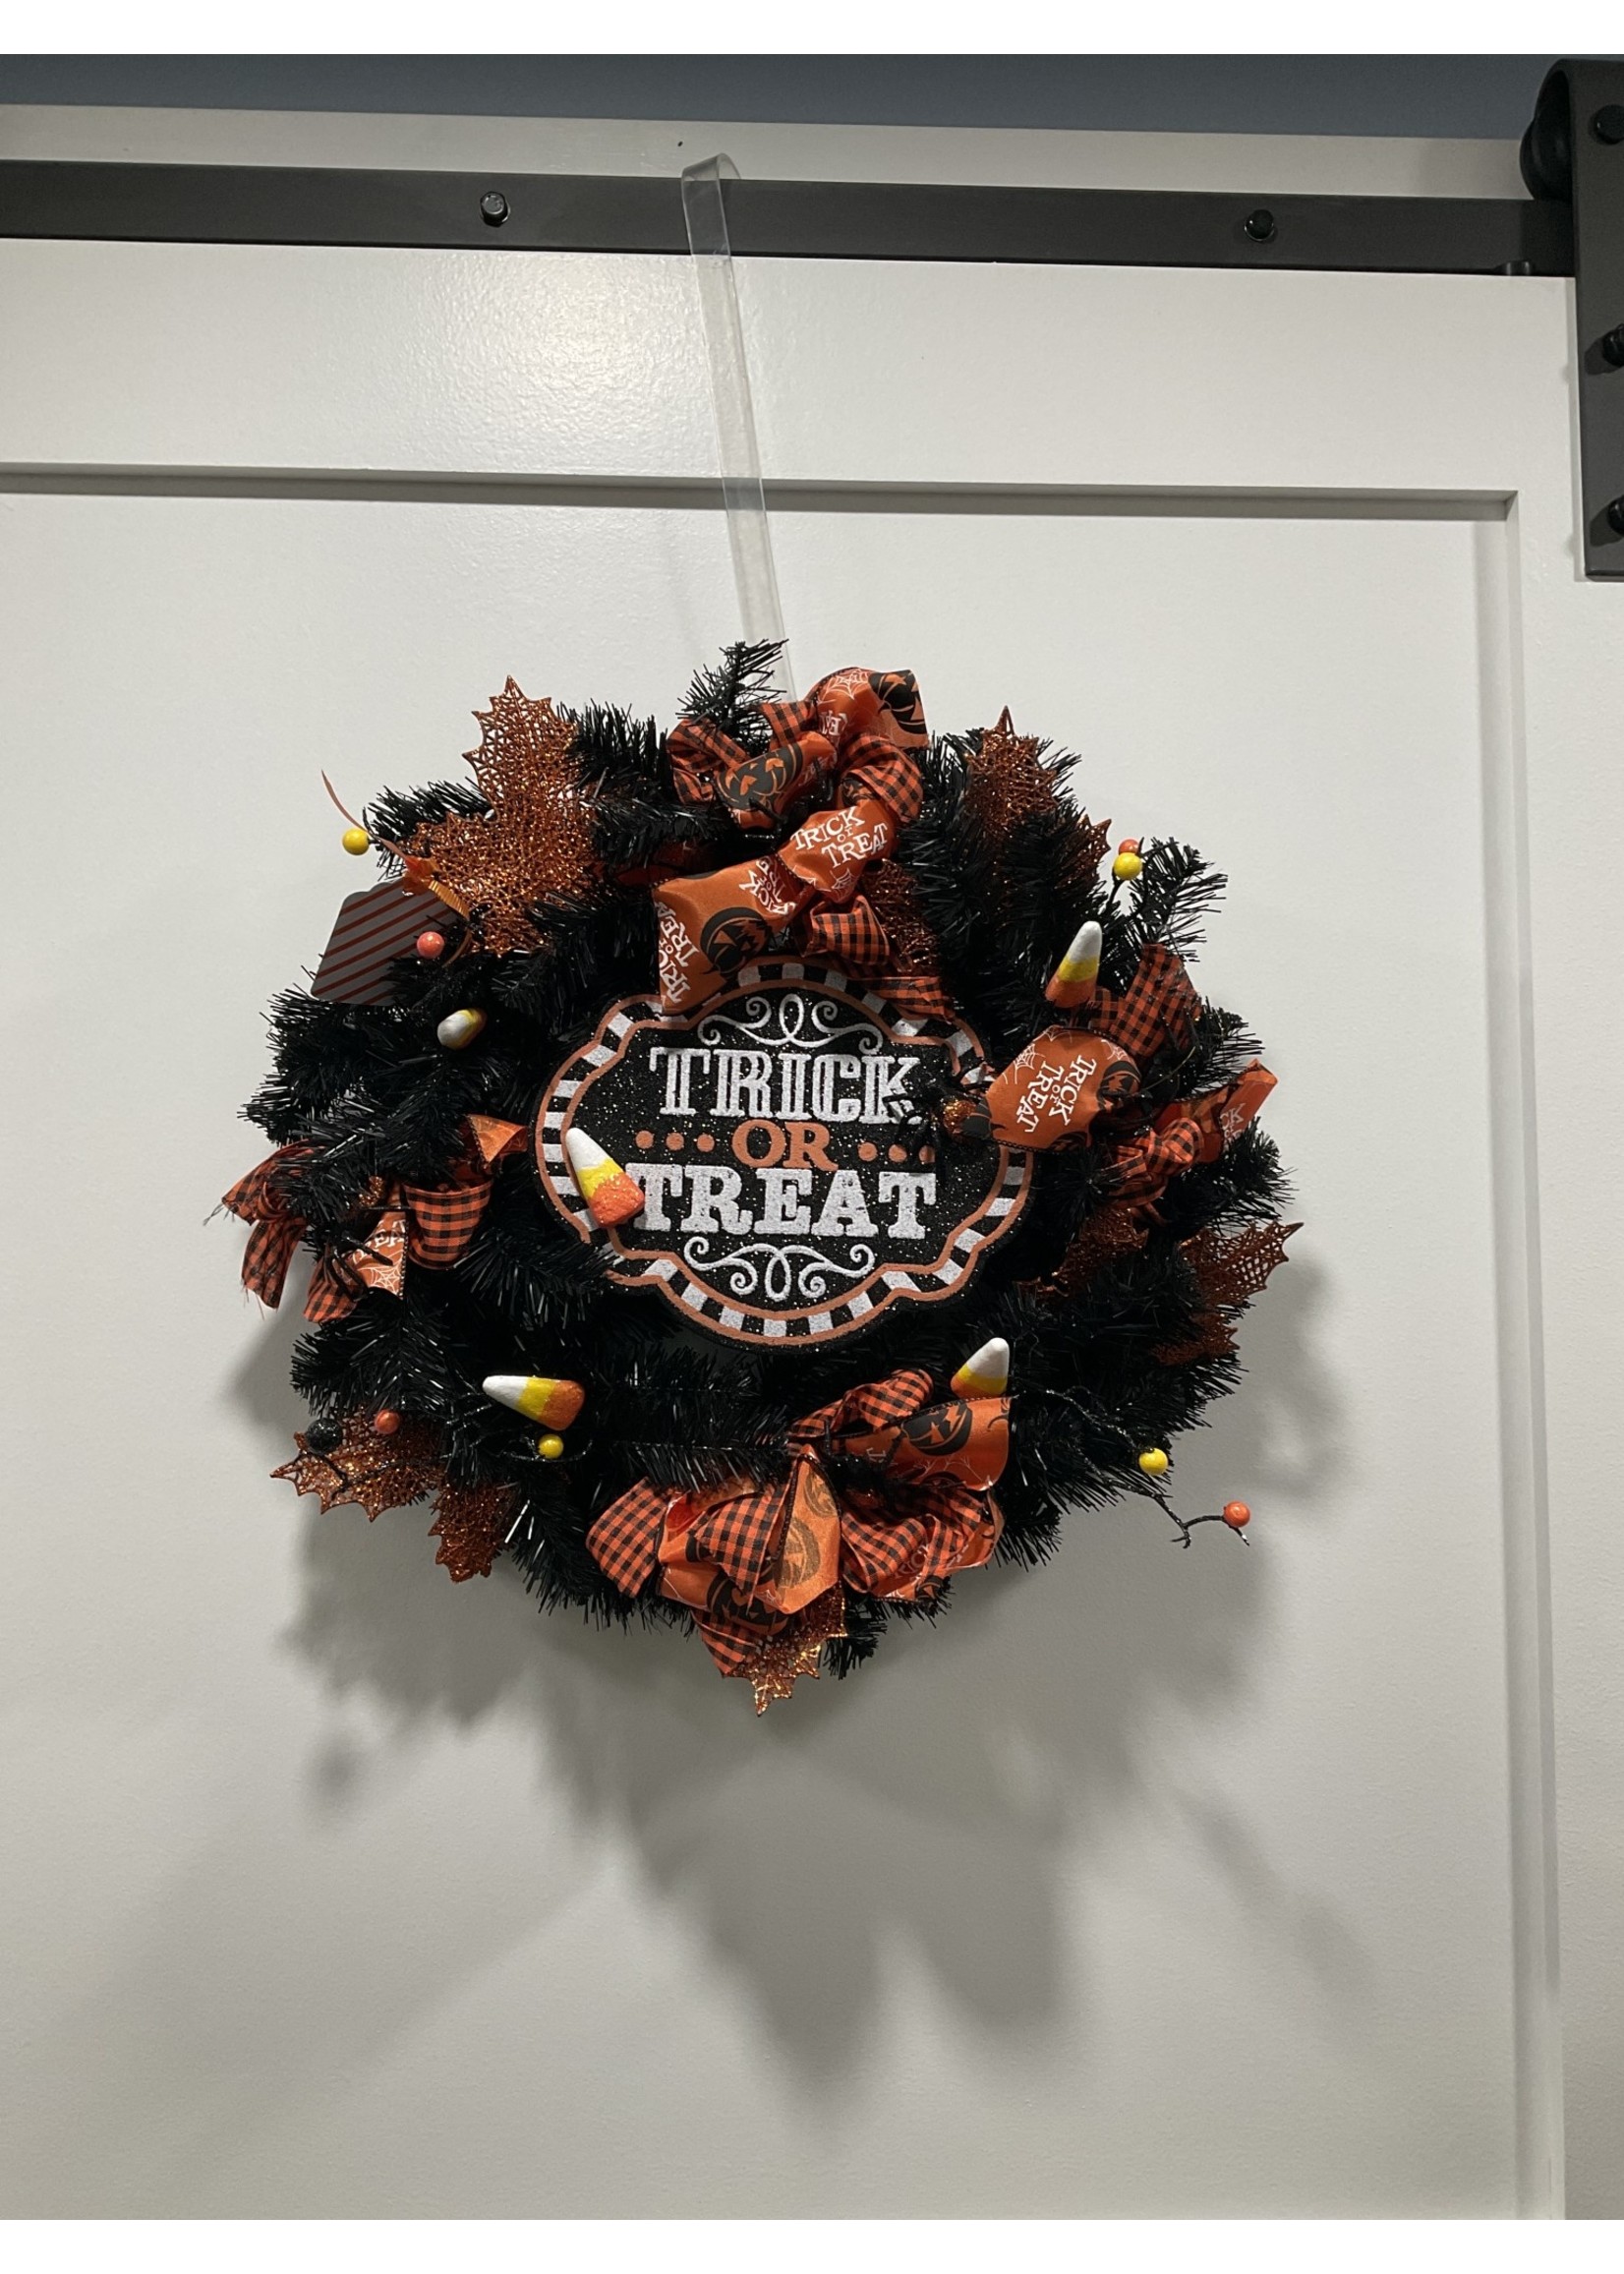 My New Favorite Thing 1794 Wreath Evergreen Black 21 in-"Trick or Treat" w/Candy Corn and Trick or Treat Ribbon